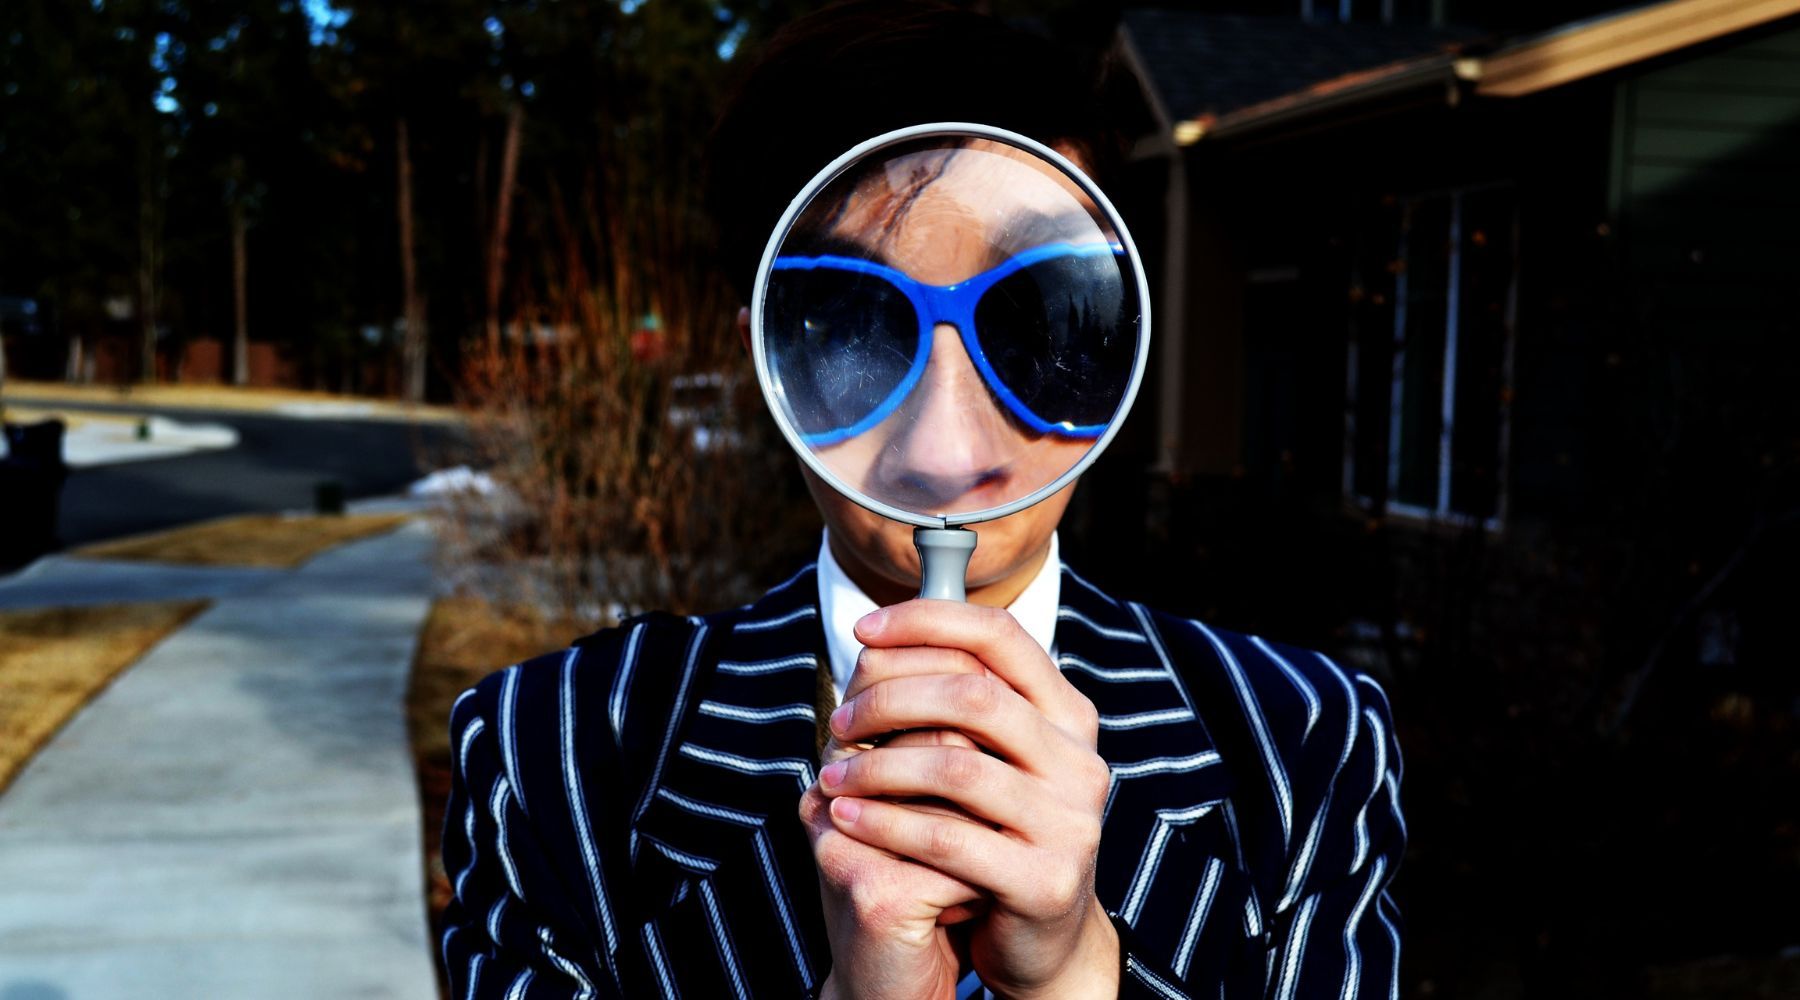 A woman with blue glasses holding a magnifier